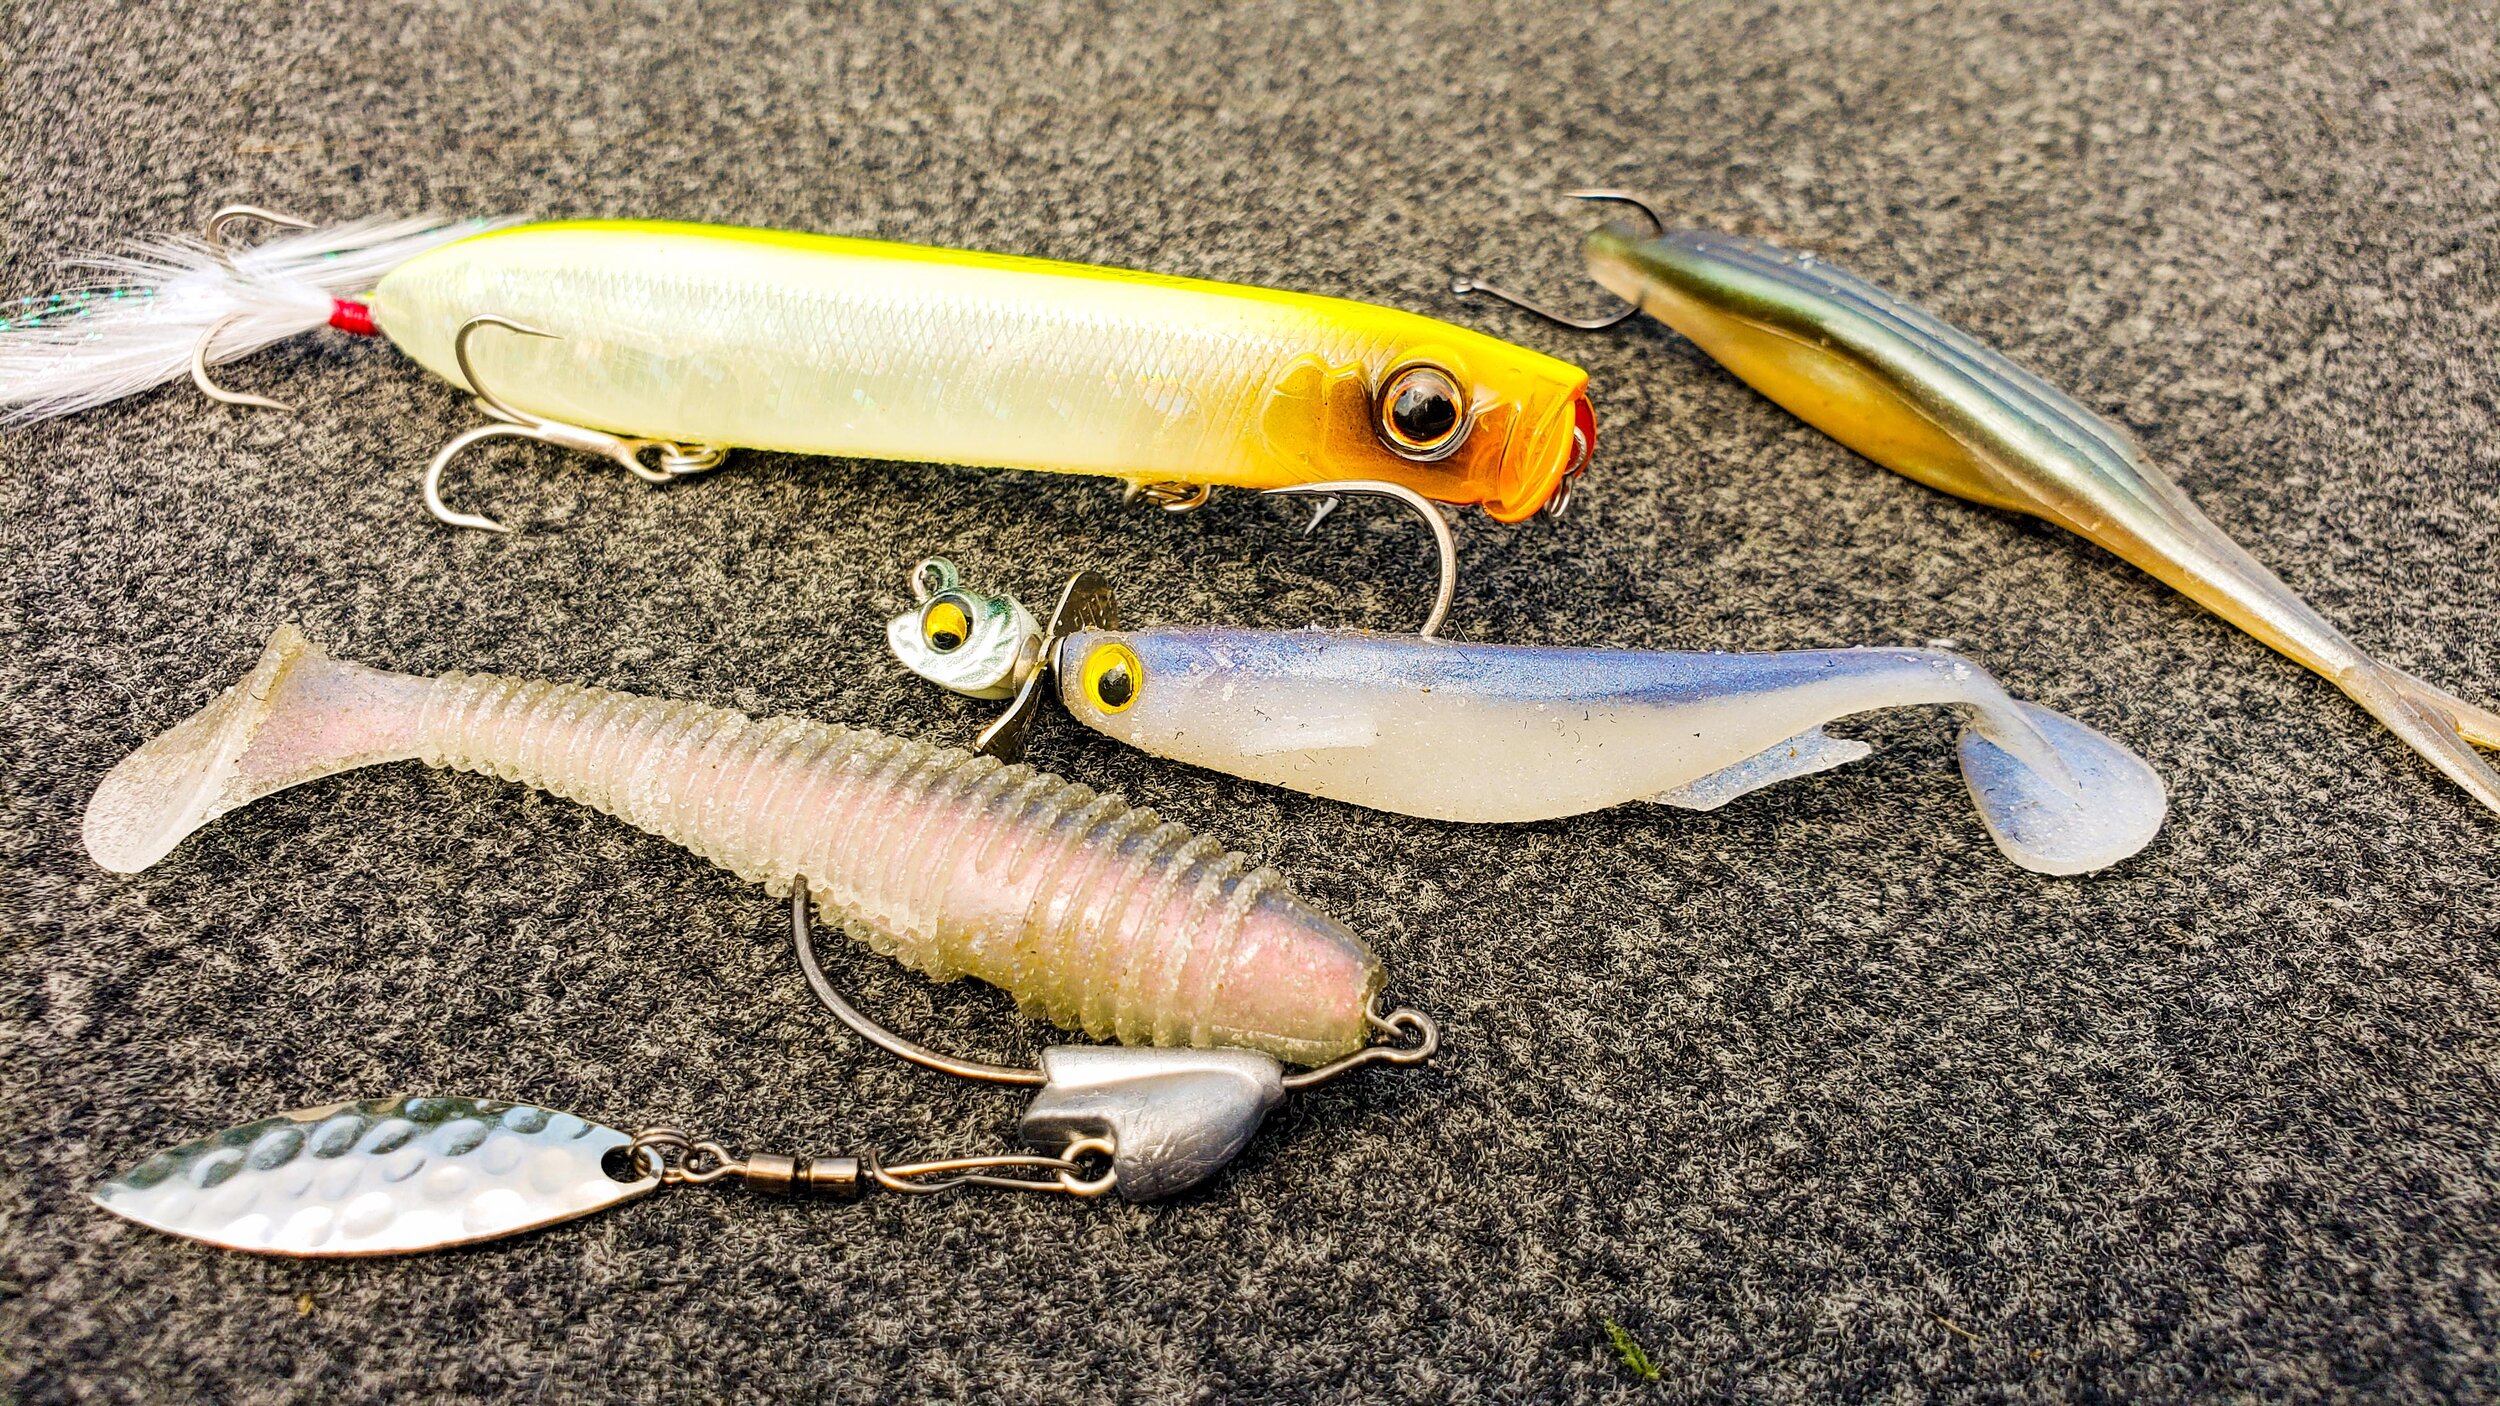 Topwater, Flukes, and Underspins For Aggressive Fall Bass